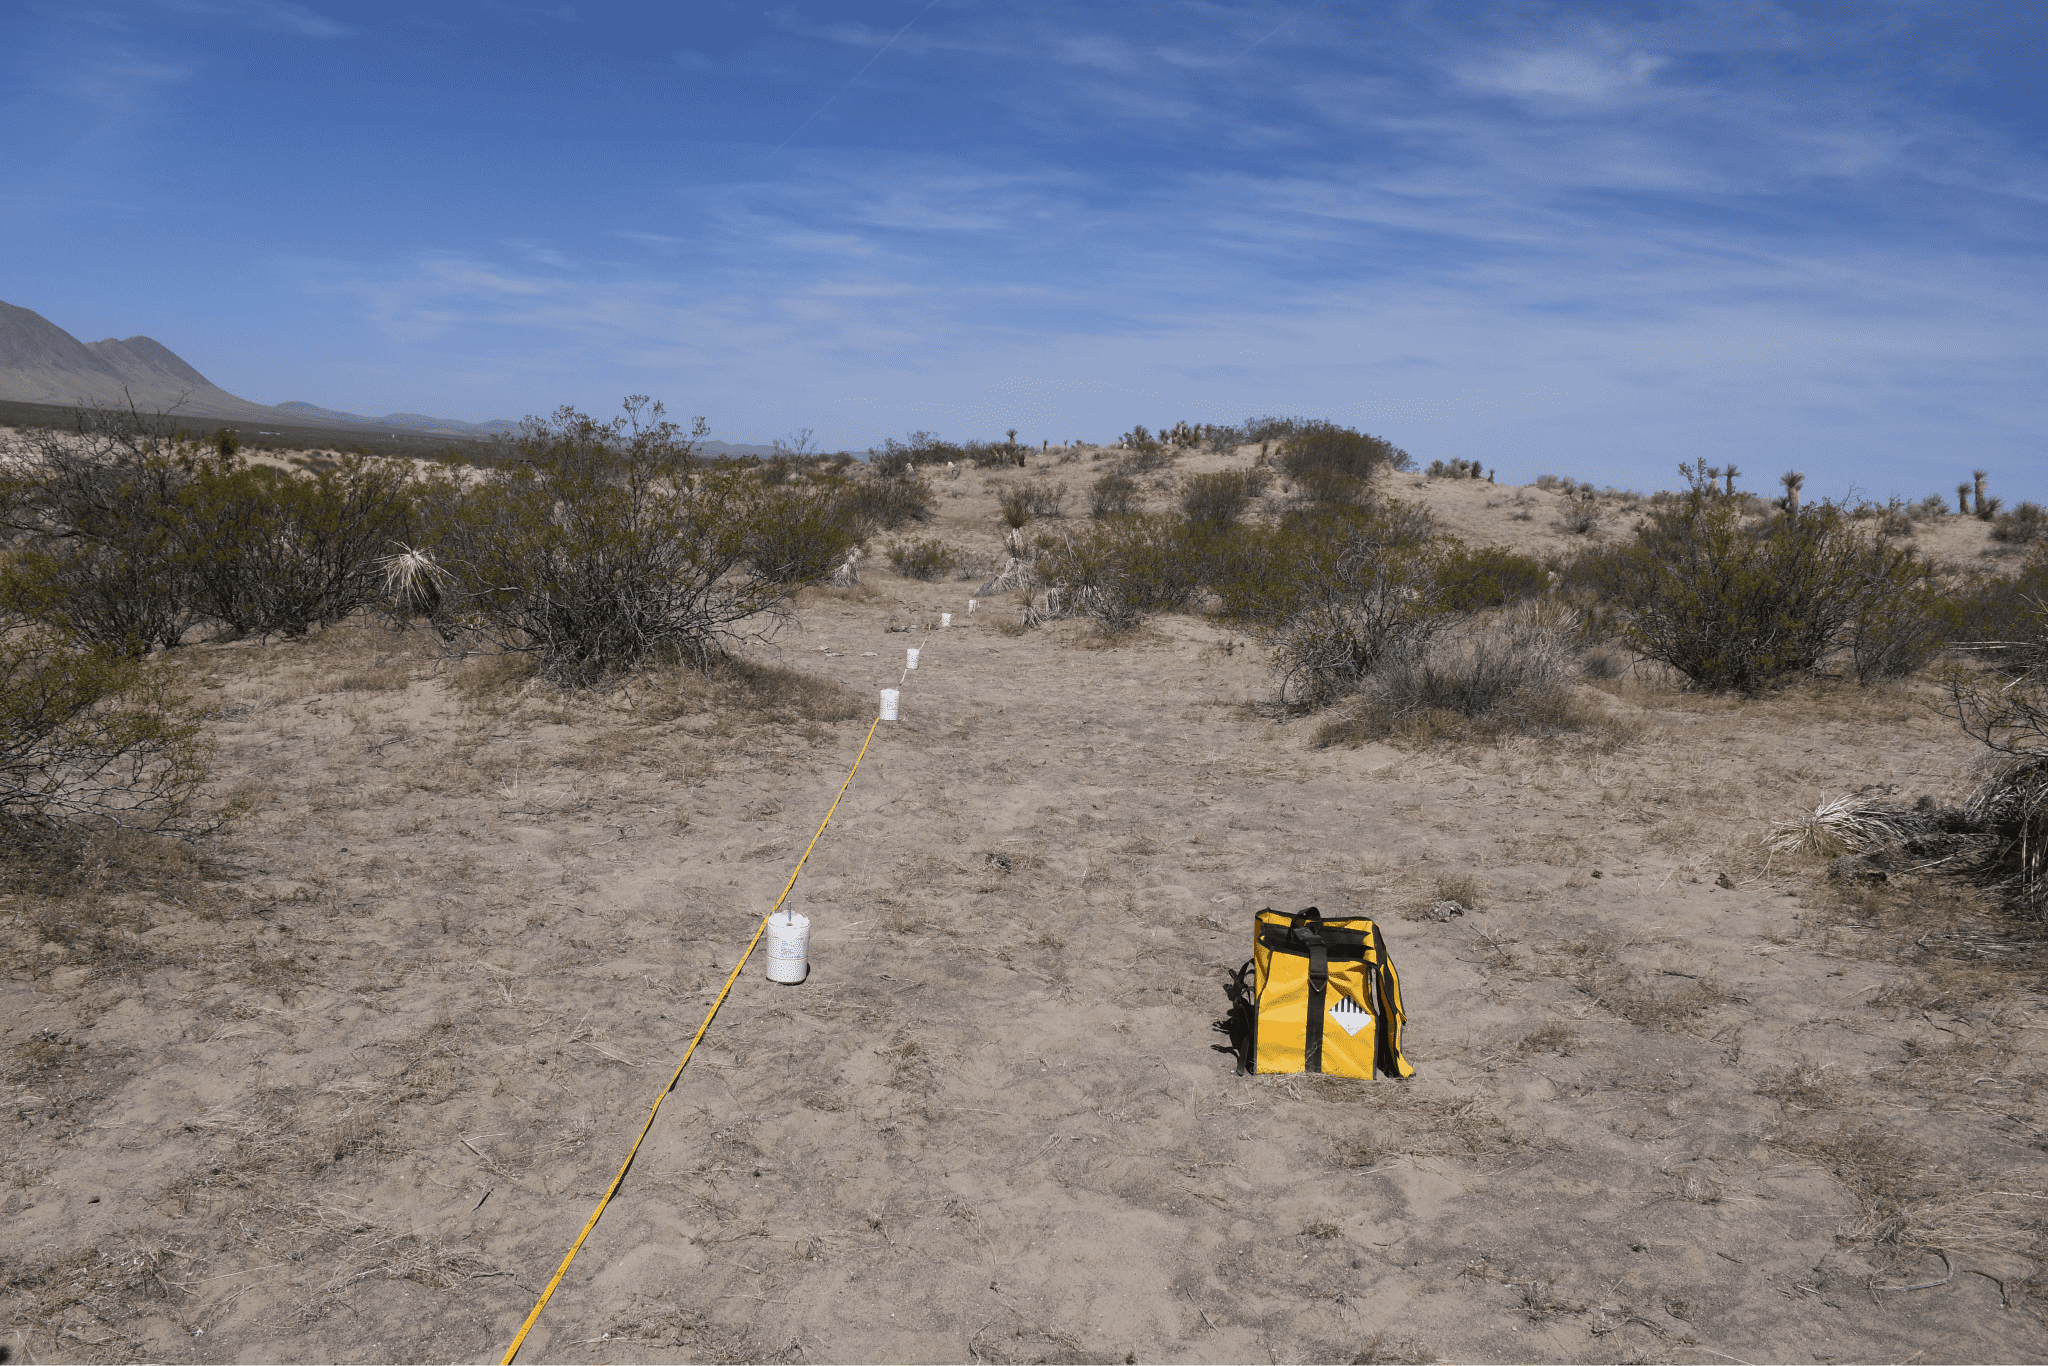 Seismometers laid out across the Potrillo Volcanic Field